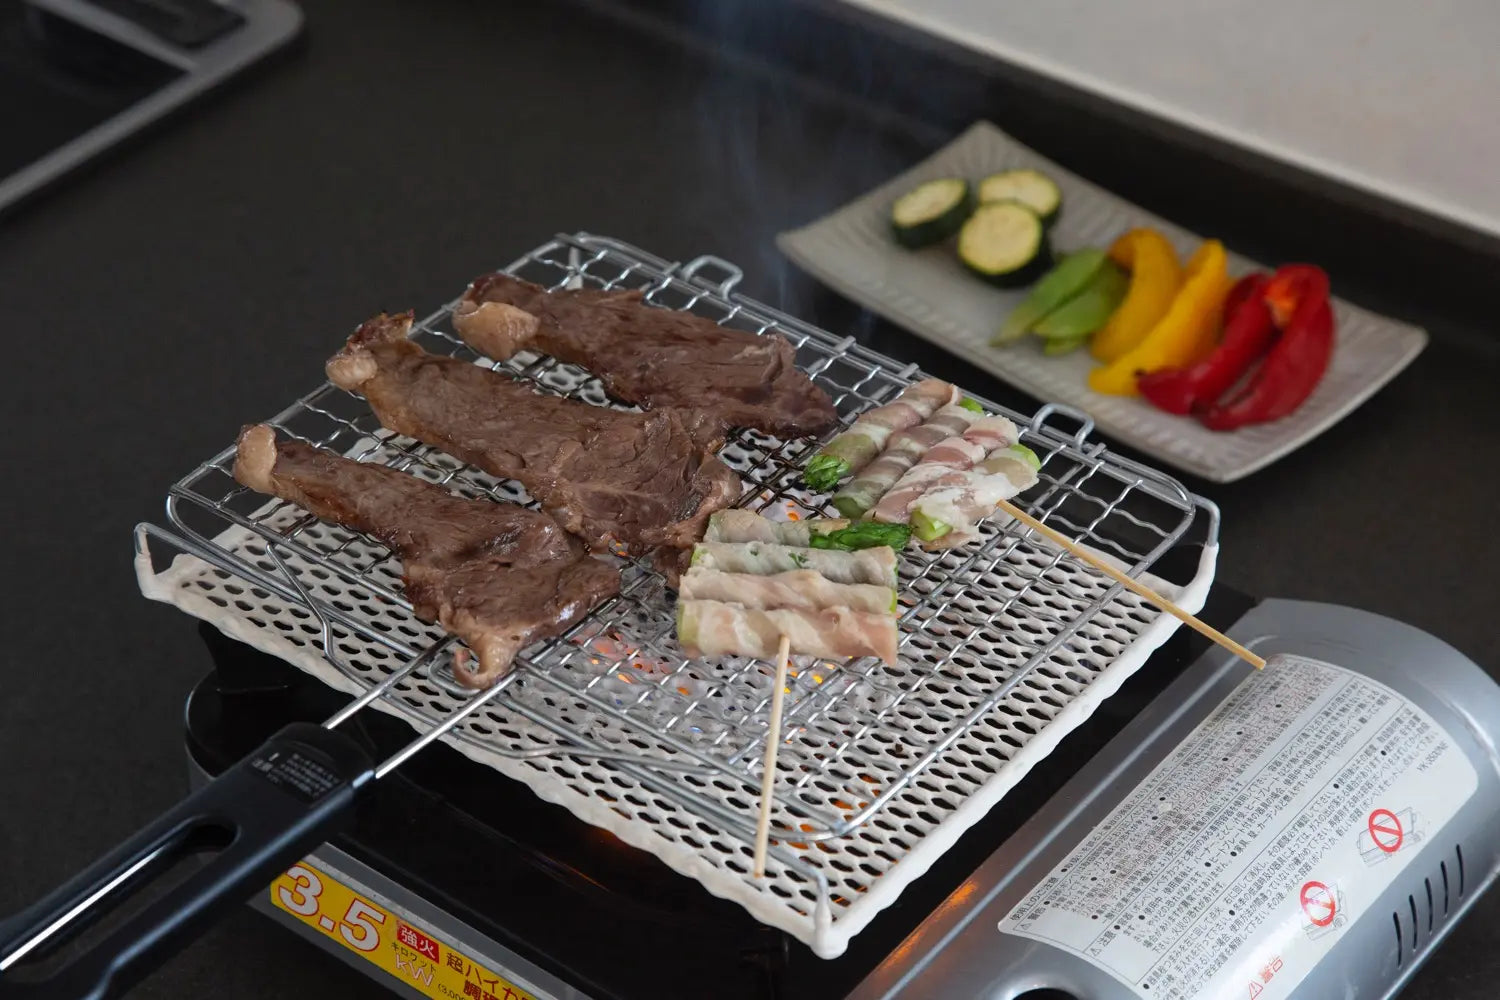 Cooking Outdoors with Mess Tins - Globalkitchen Japan